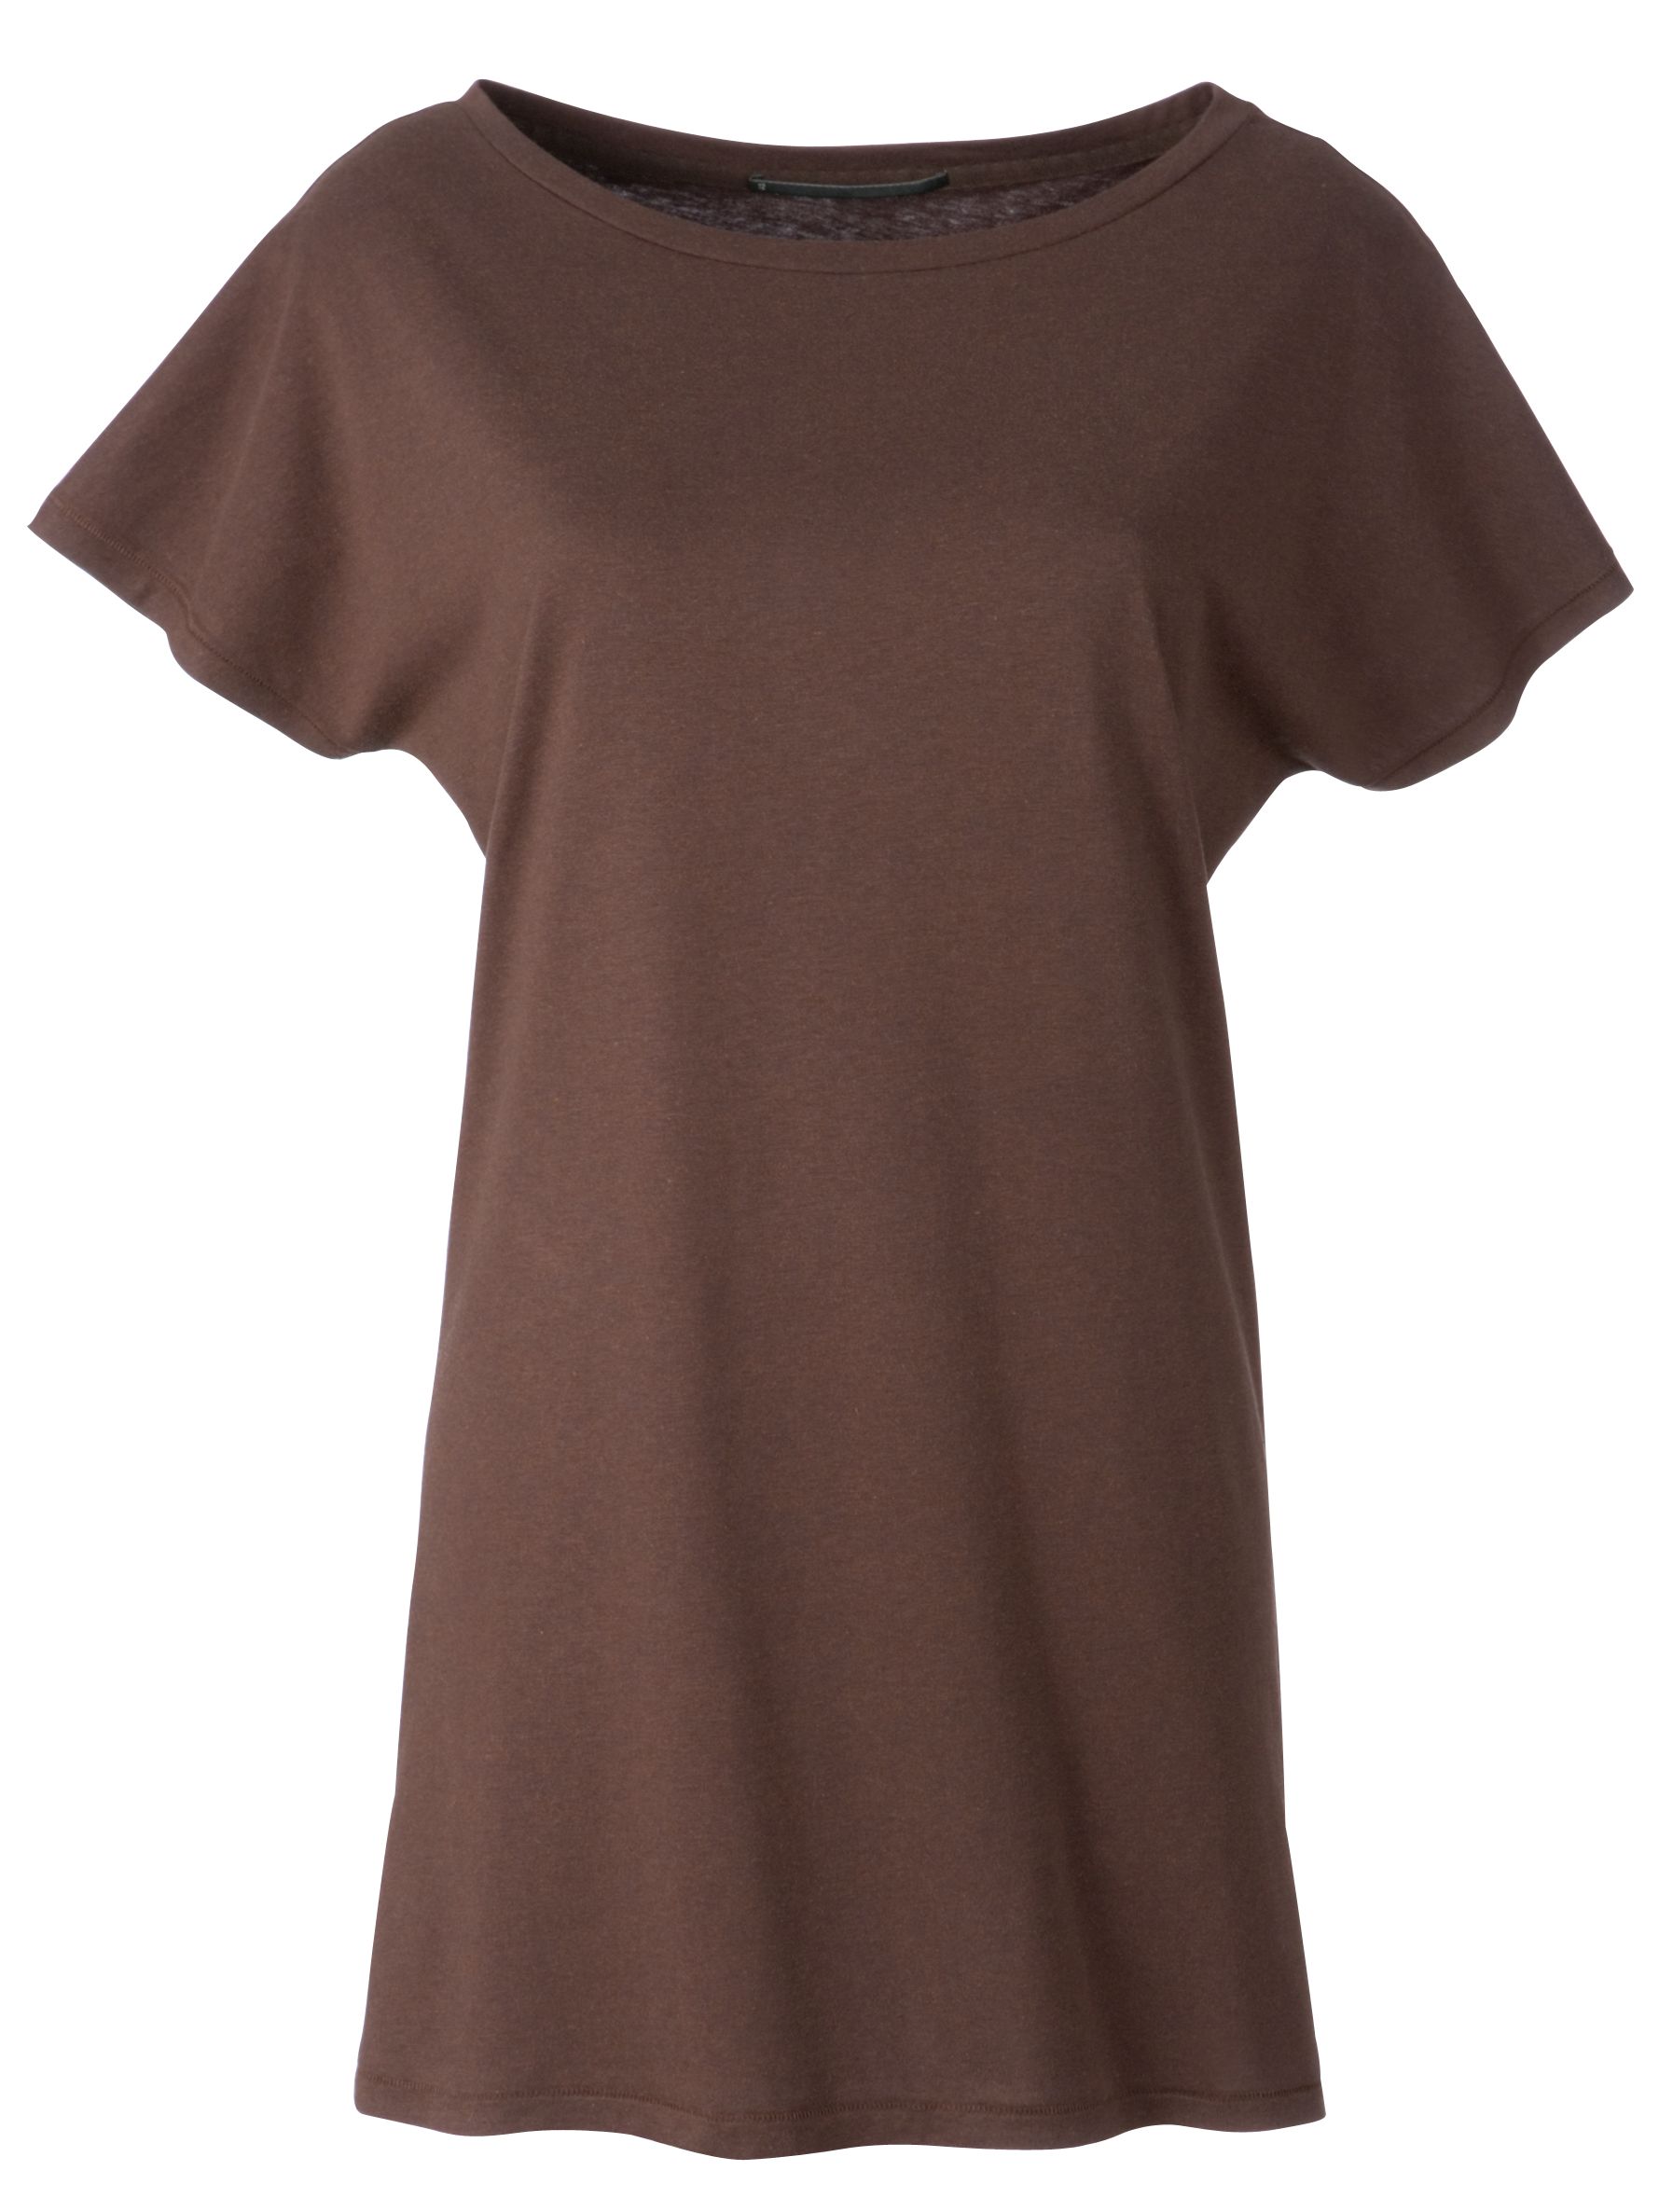 Basic Deluxe Boat Neck Long T-Shirt, Chocolate